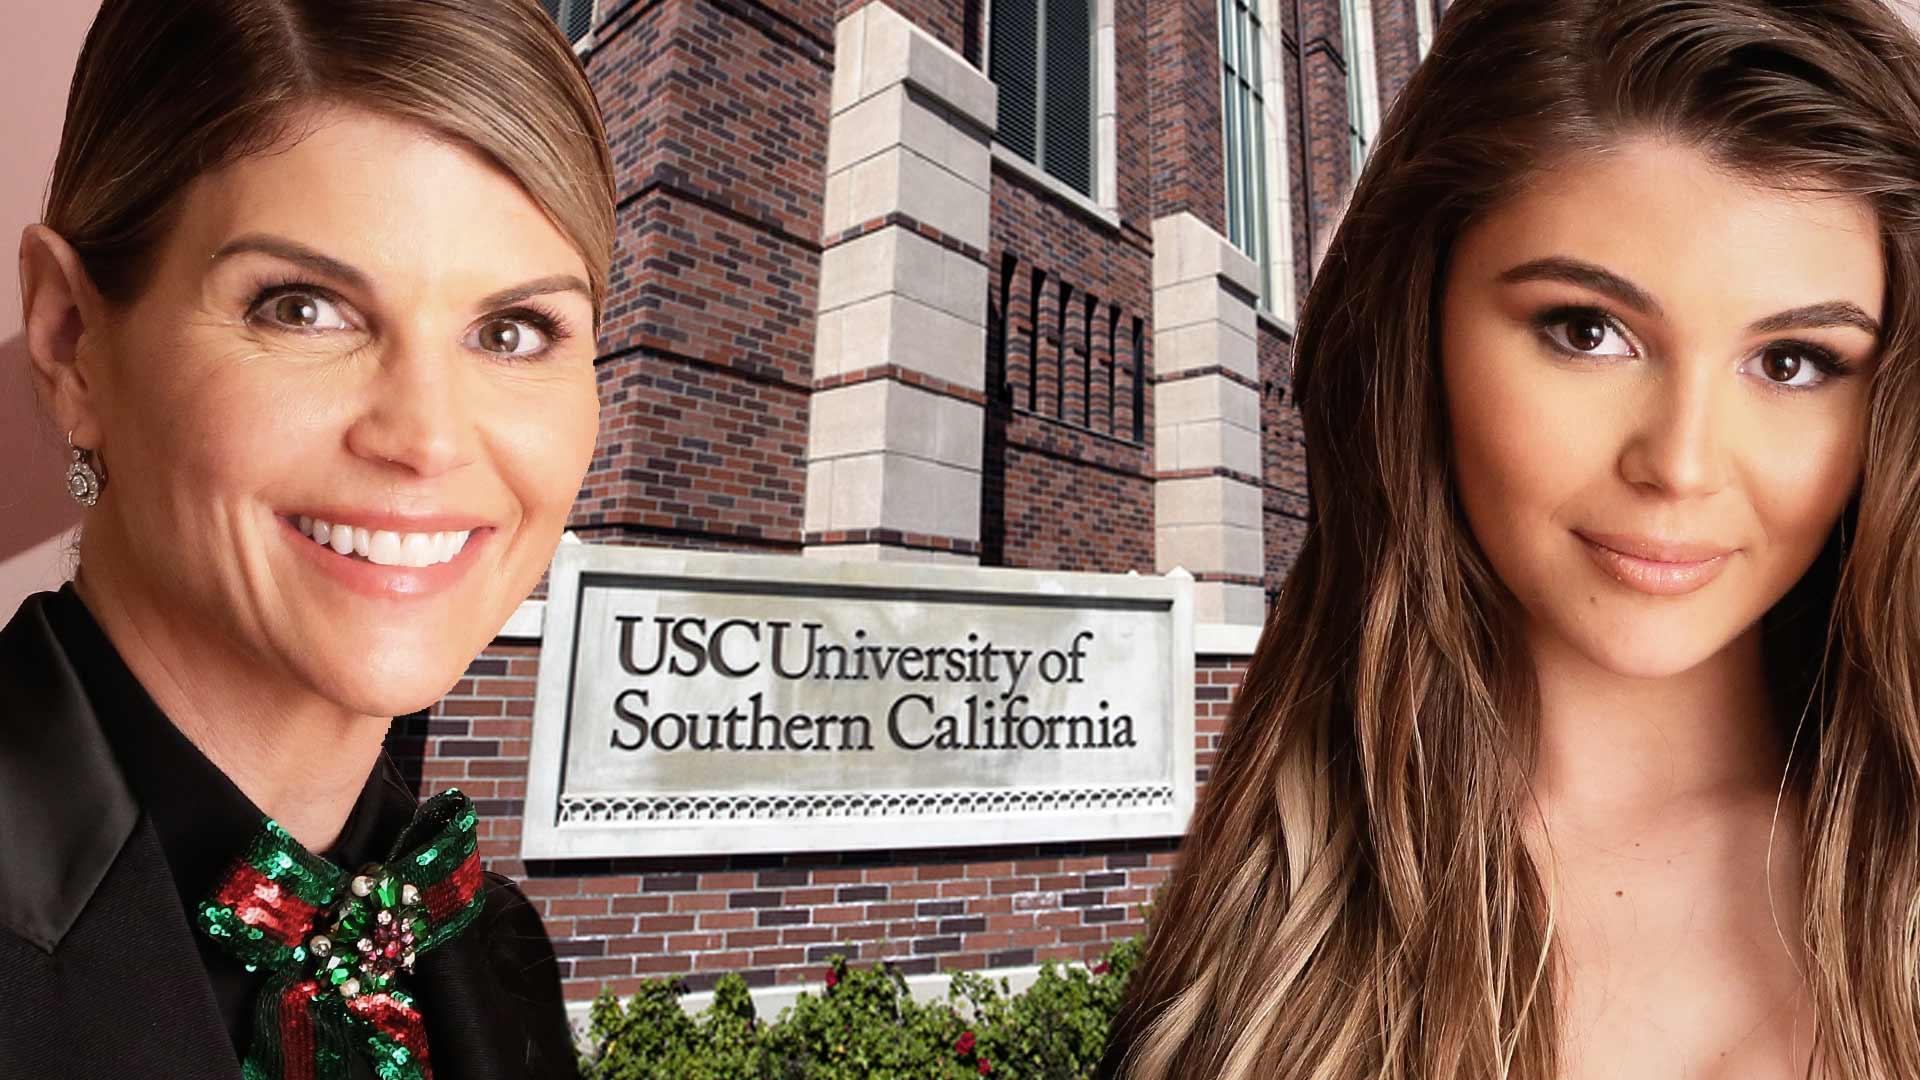 Lori Loughlin’s Daughter in Danger of Getting Expelled From USC